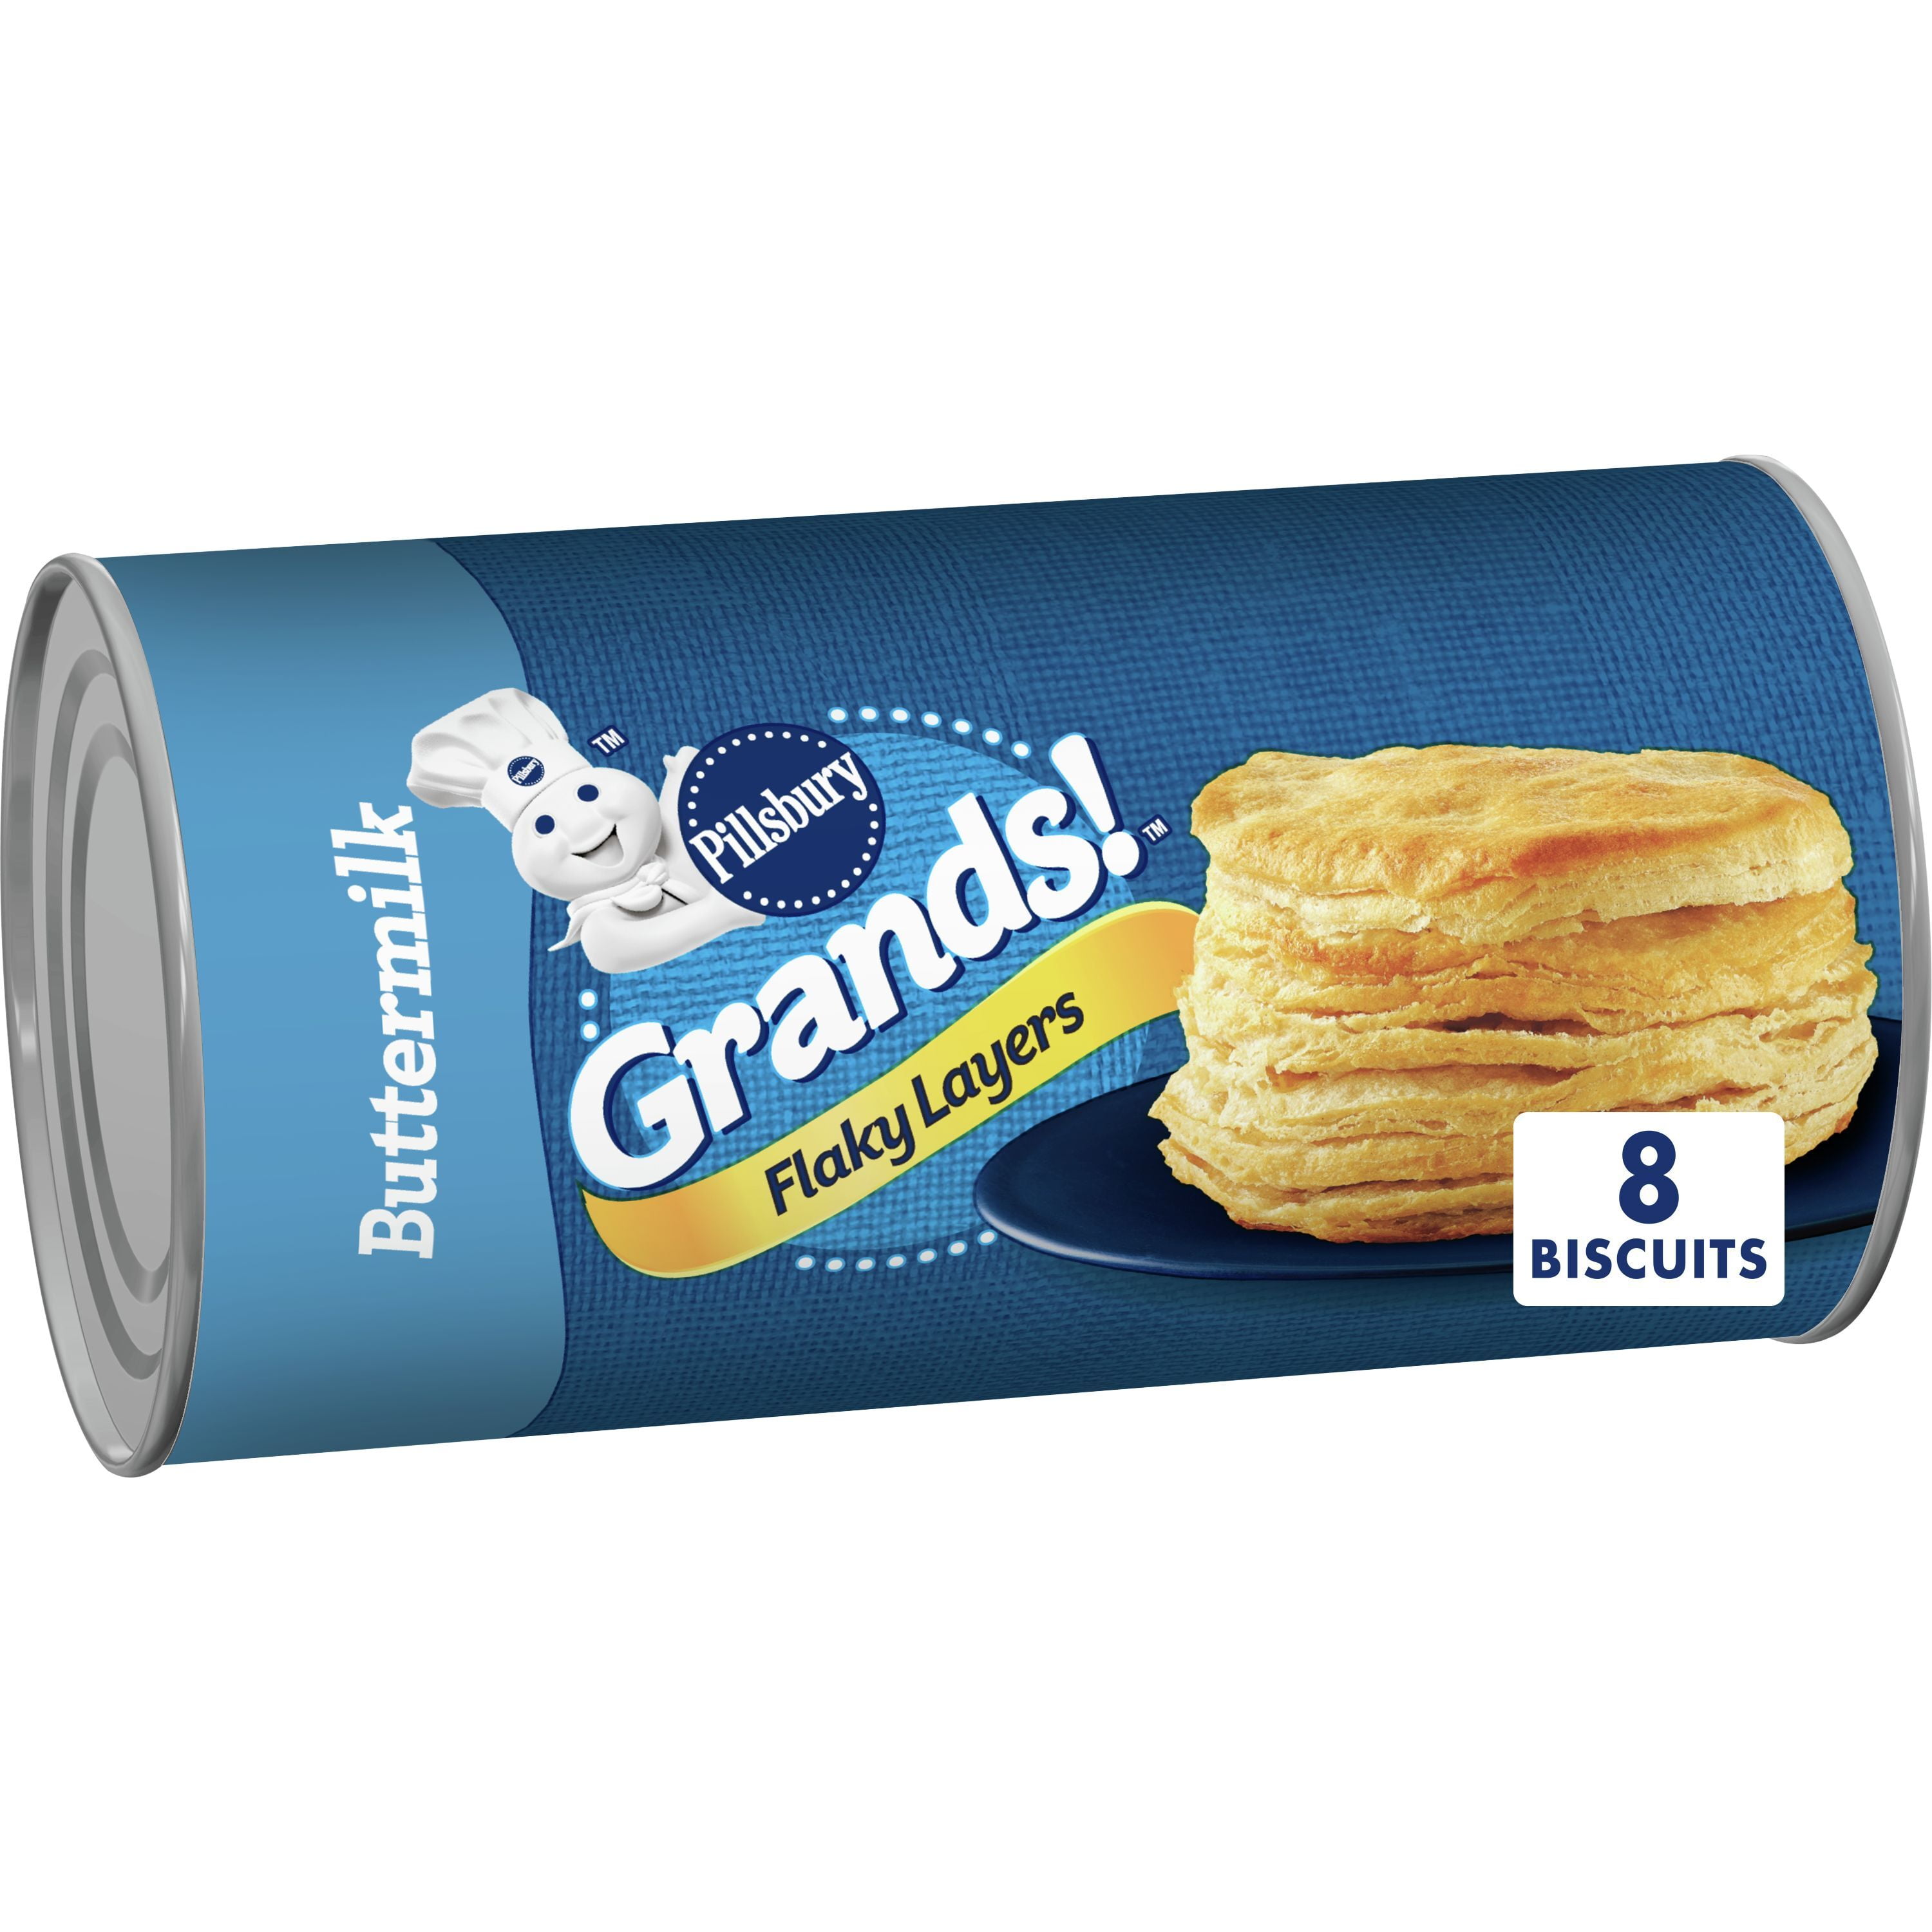 Pillsbury Grands! Flaky Layers Refrigerated Biscuits, Buttermilk, 8 ct., 16 oz.